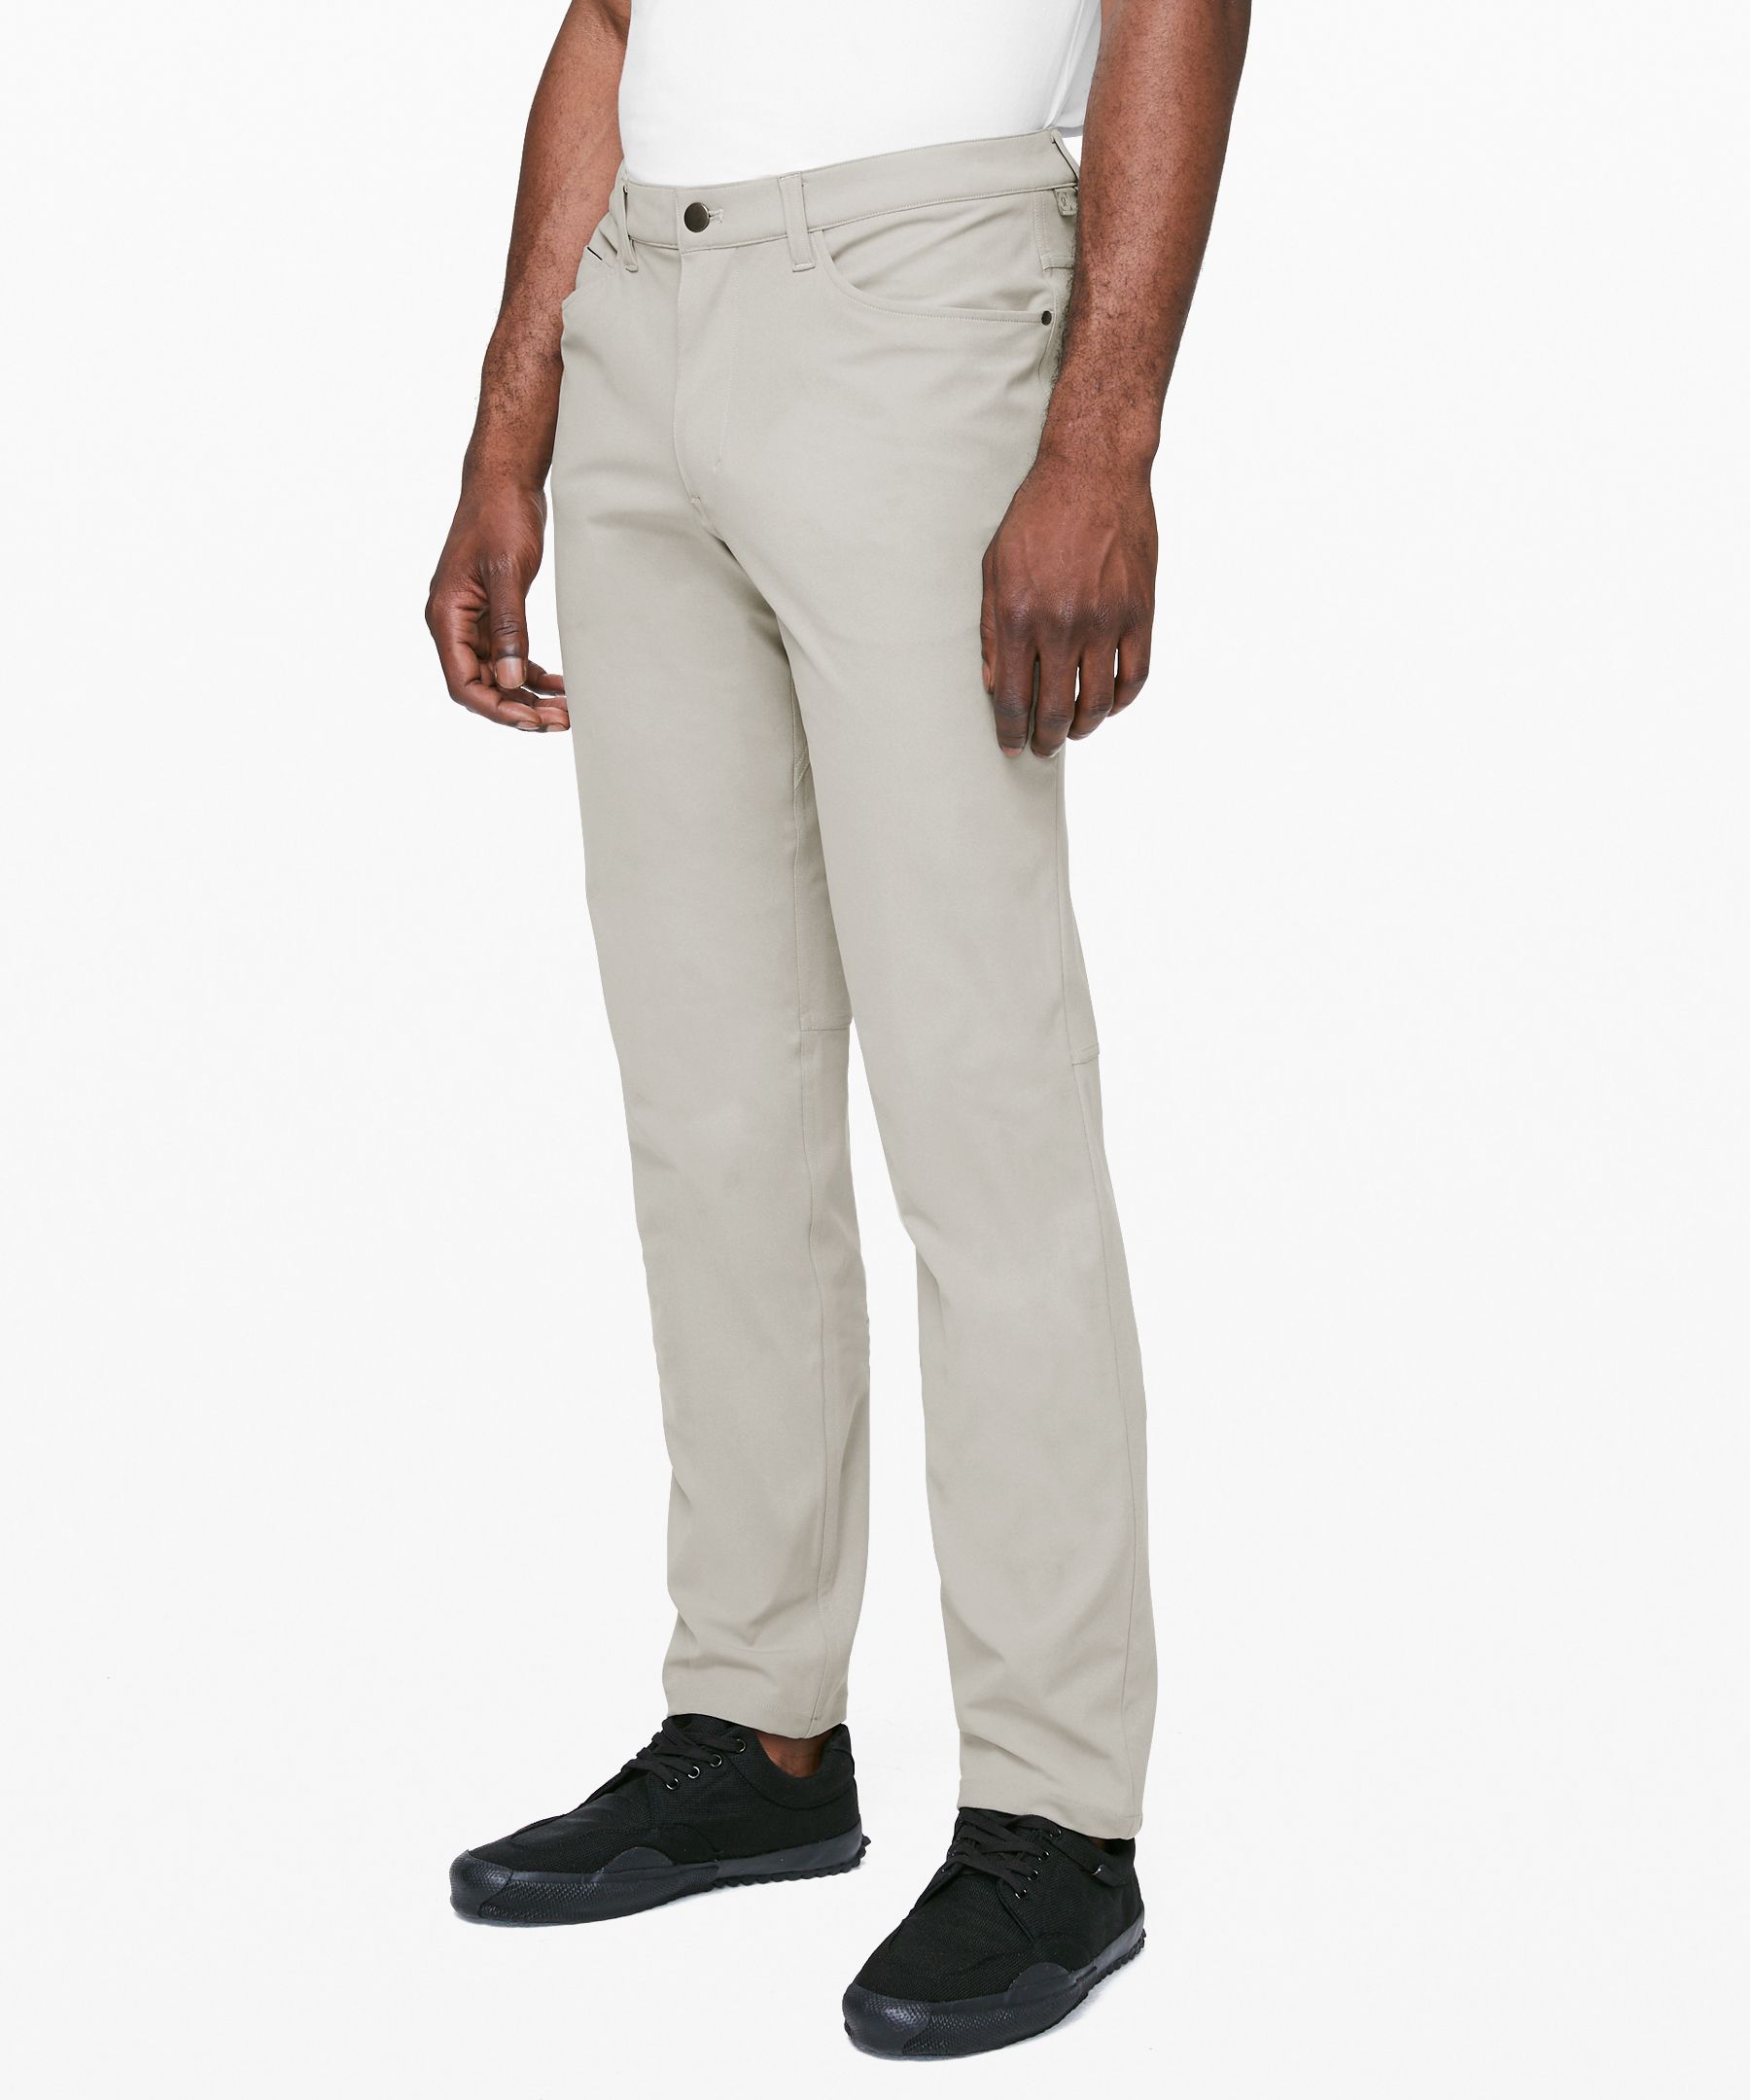 Lululemon Abc Pant Classic *online Only Warpstreme 30" In Riverstone